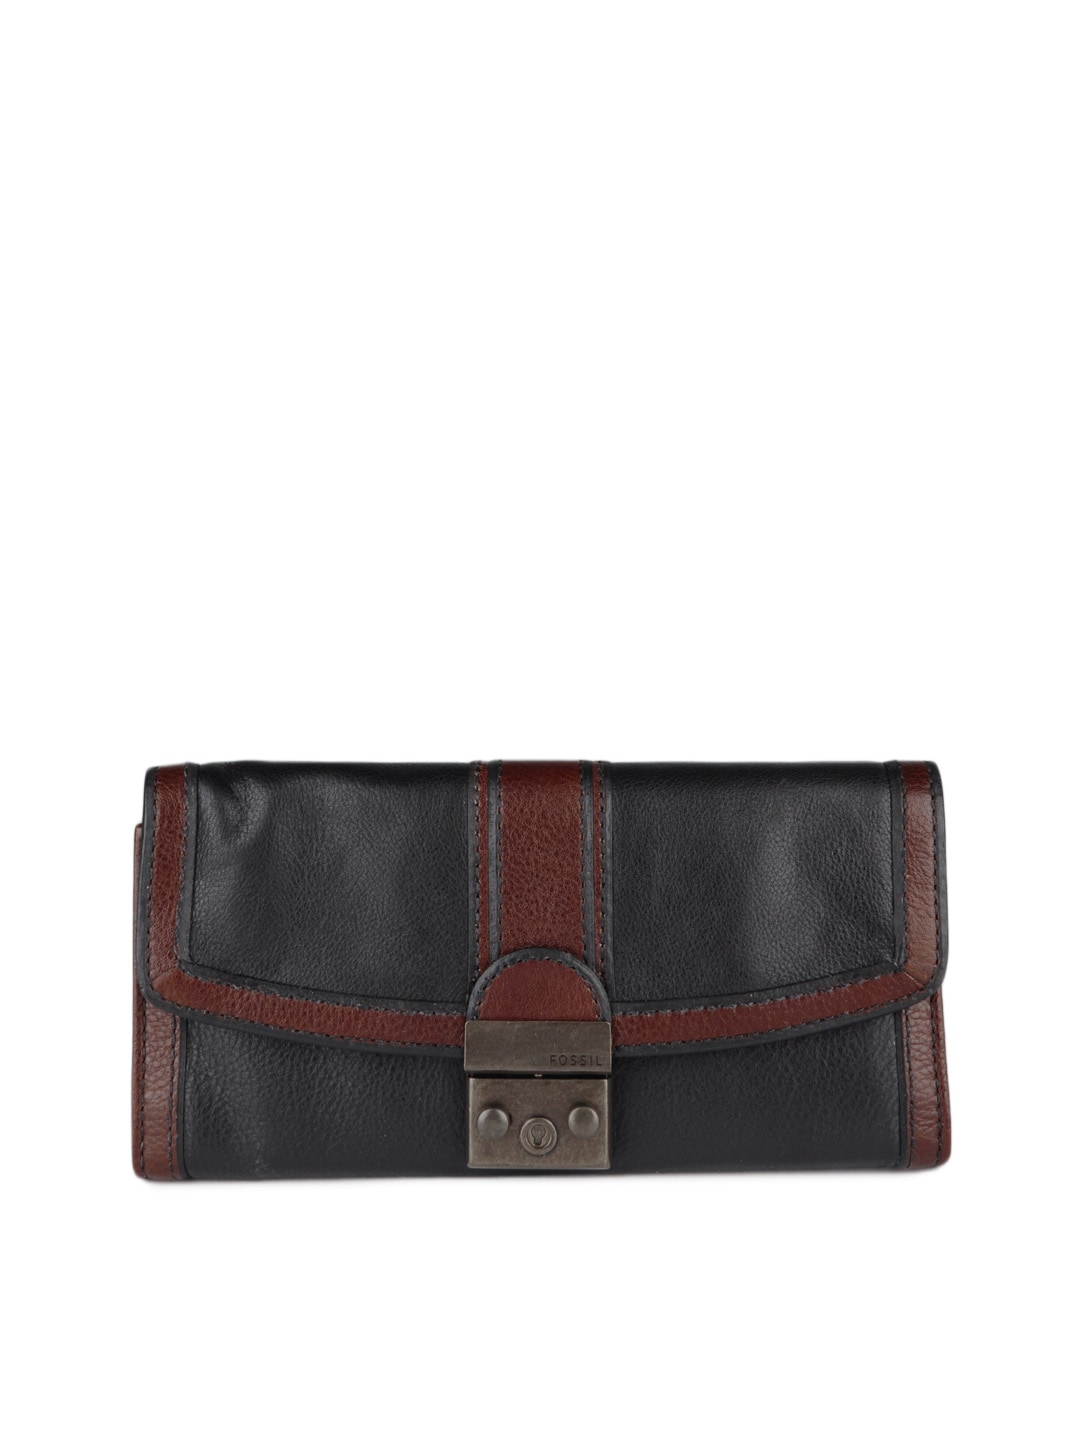 Fossil Women Black and Brown Wallet